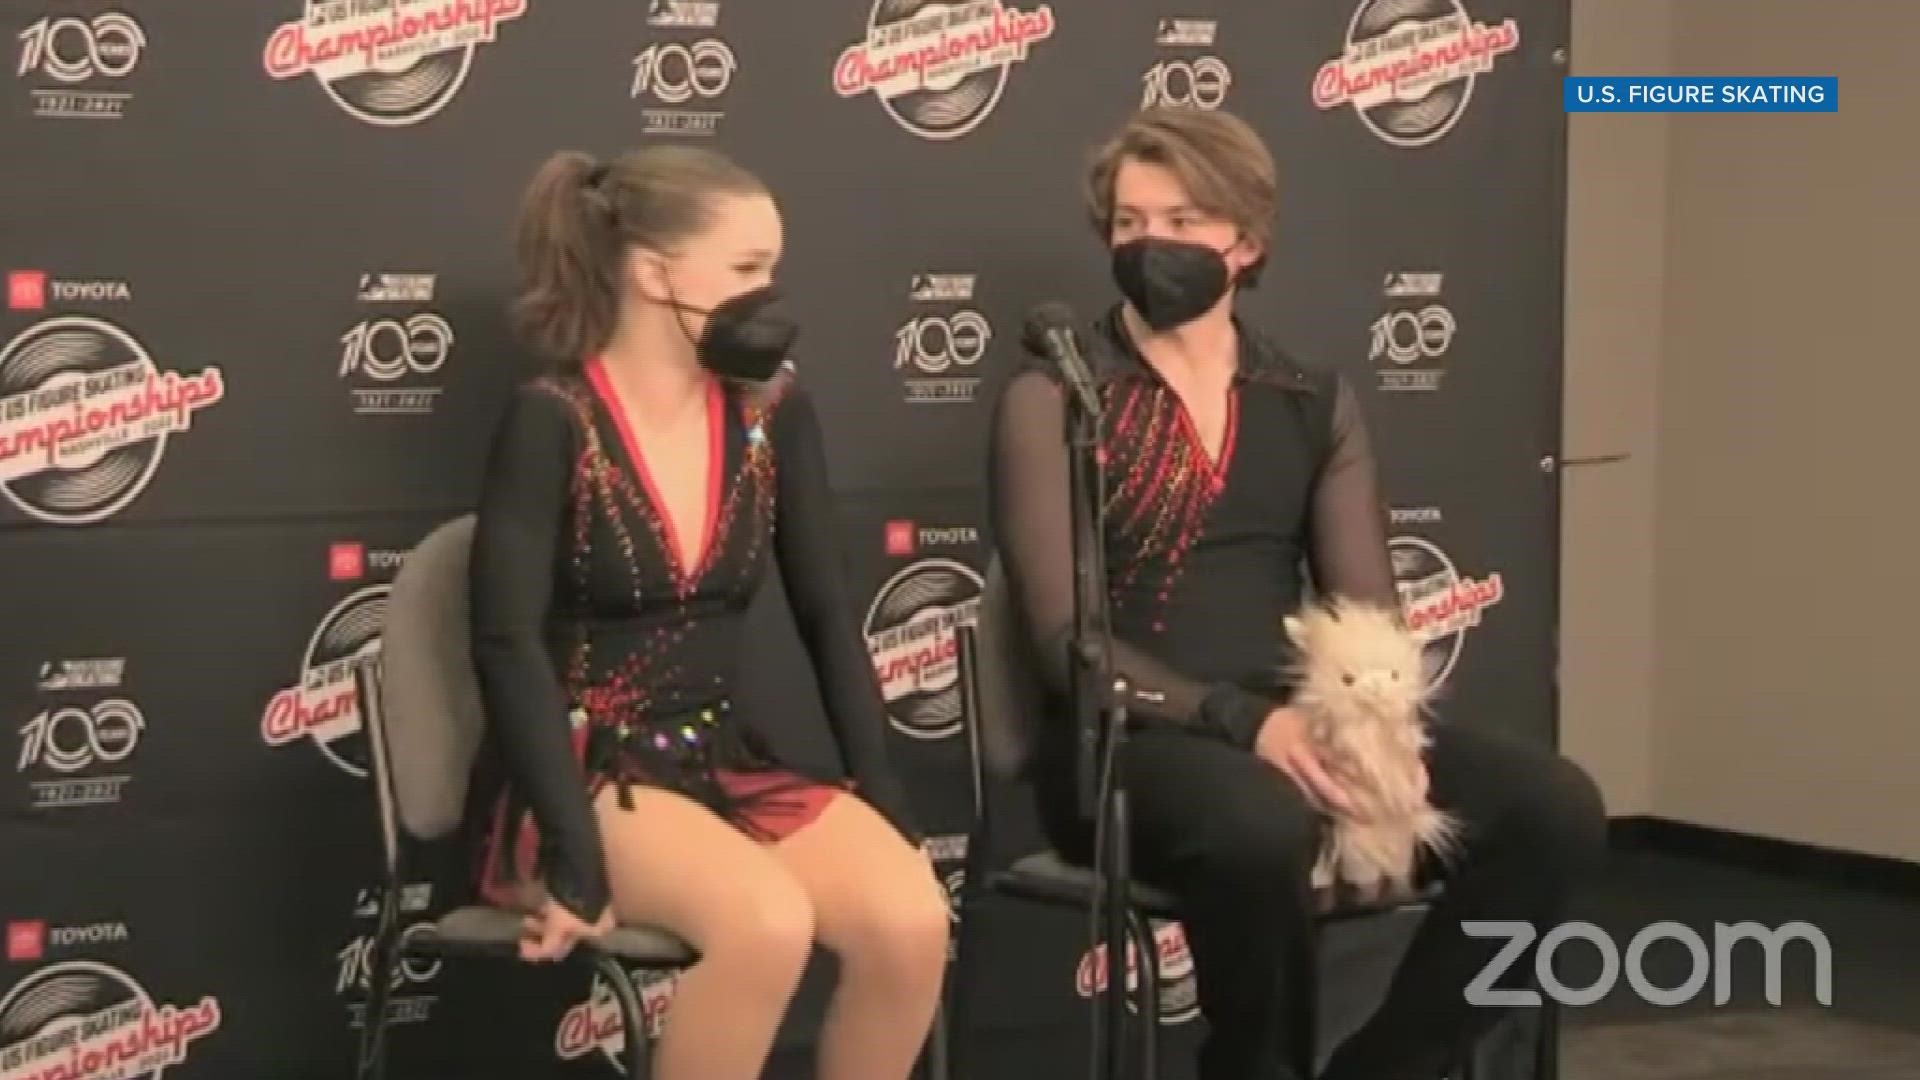 Catherine Rivers and Timmy Chapman were in fourth place after the short program.